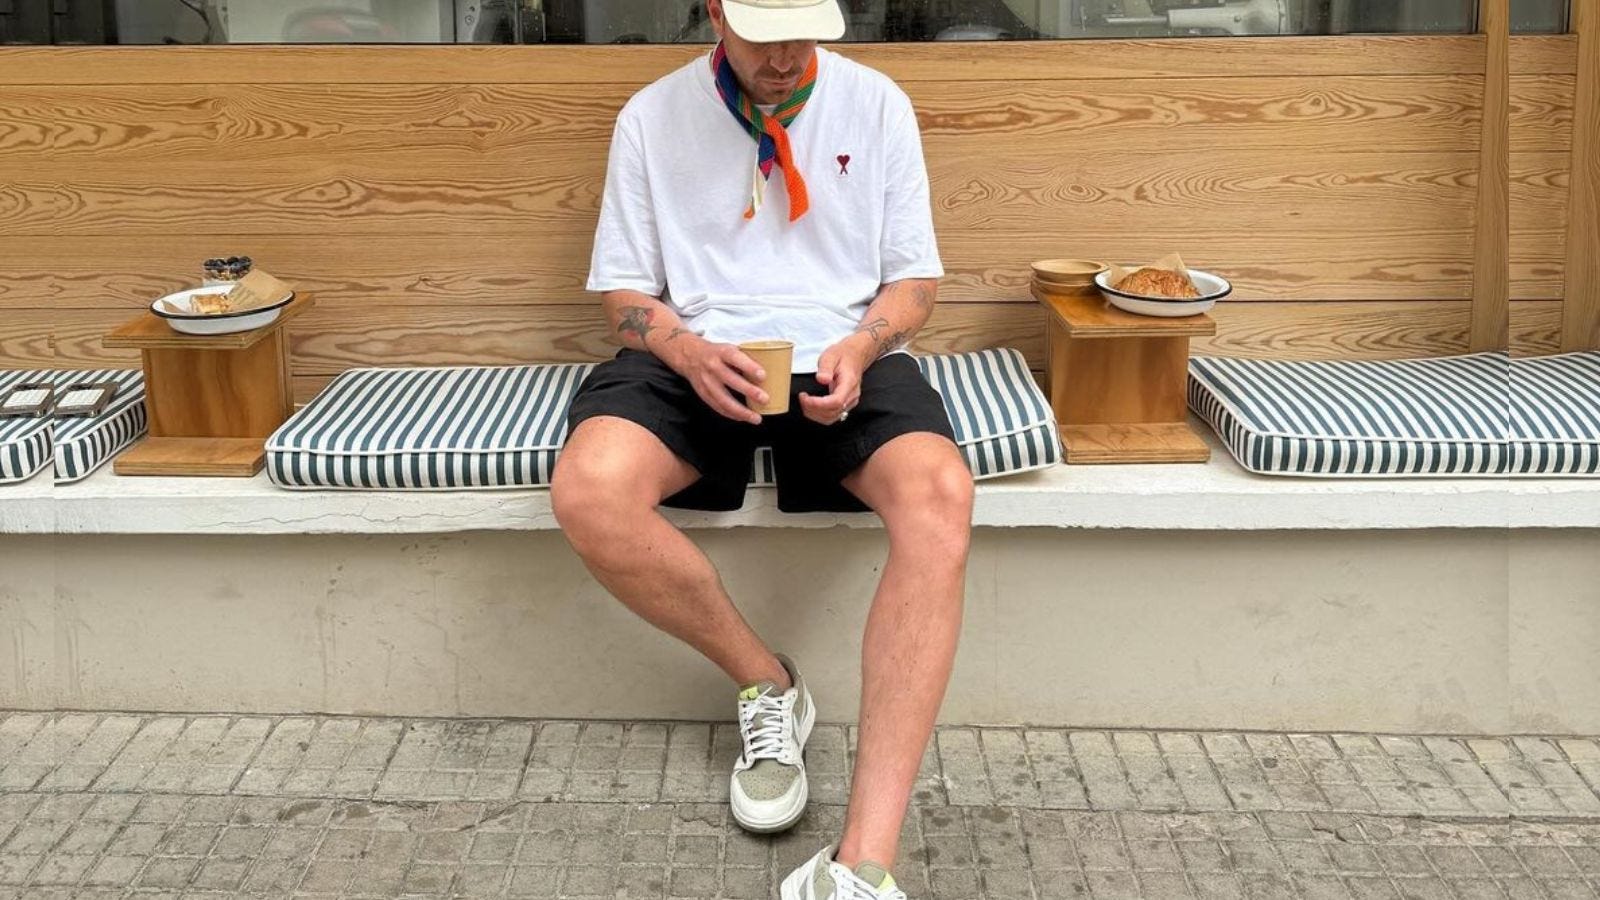 a man sitting outside a cafe in a white t-shirt, orange bandana, dark shorts, and light sneakers